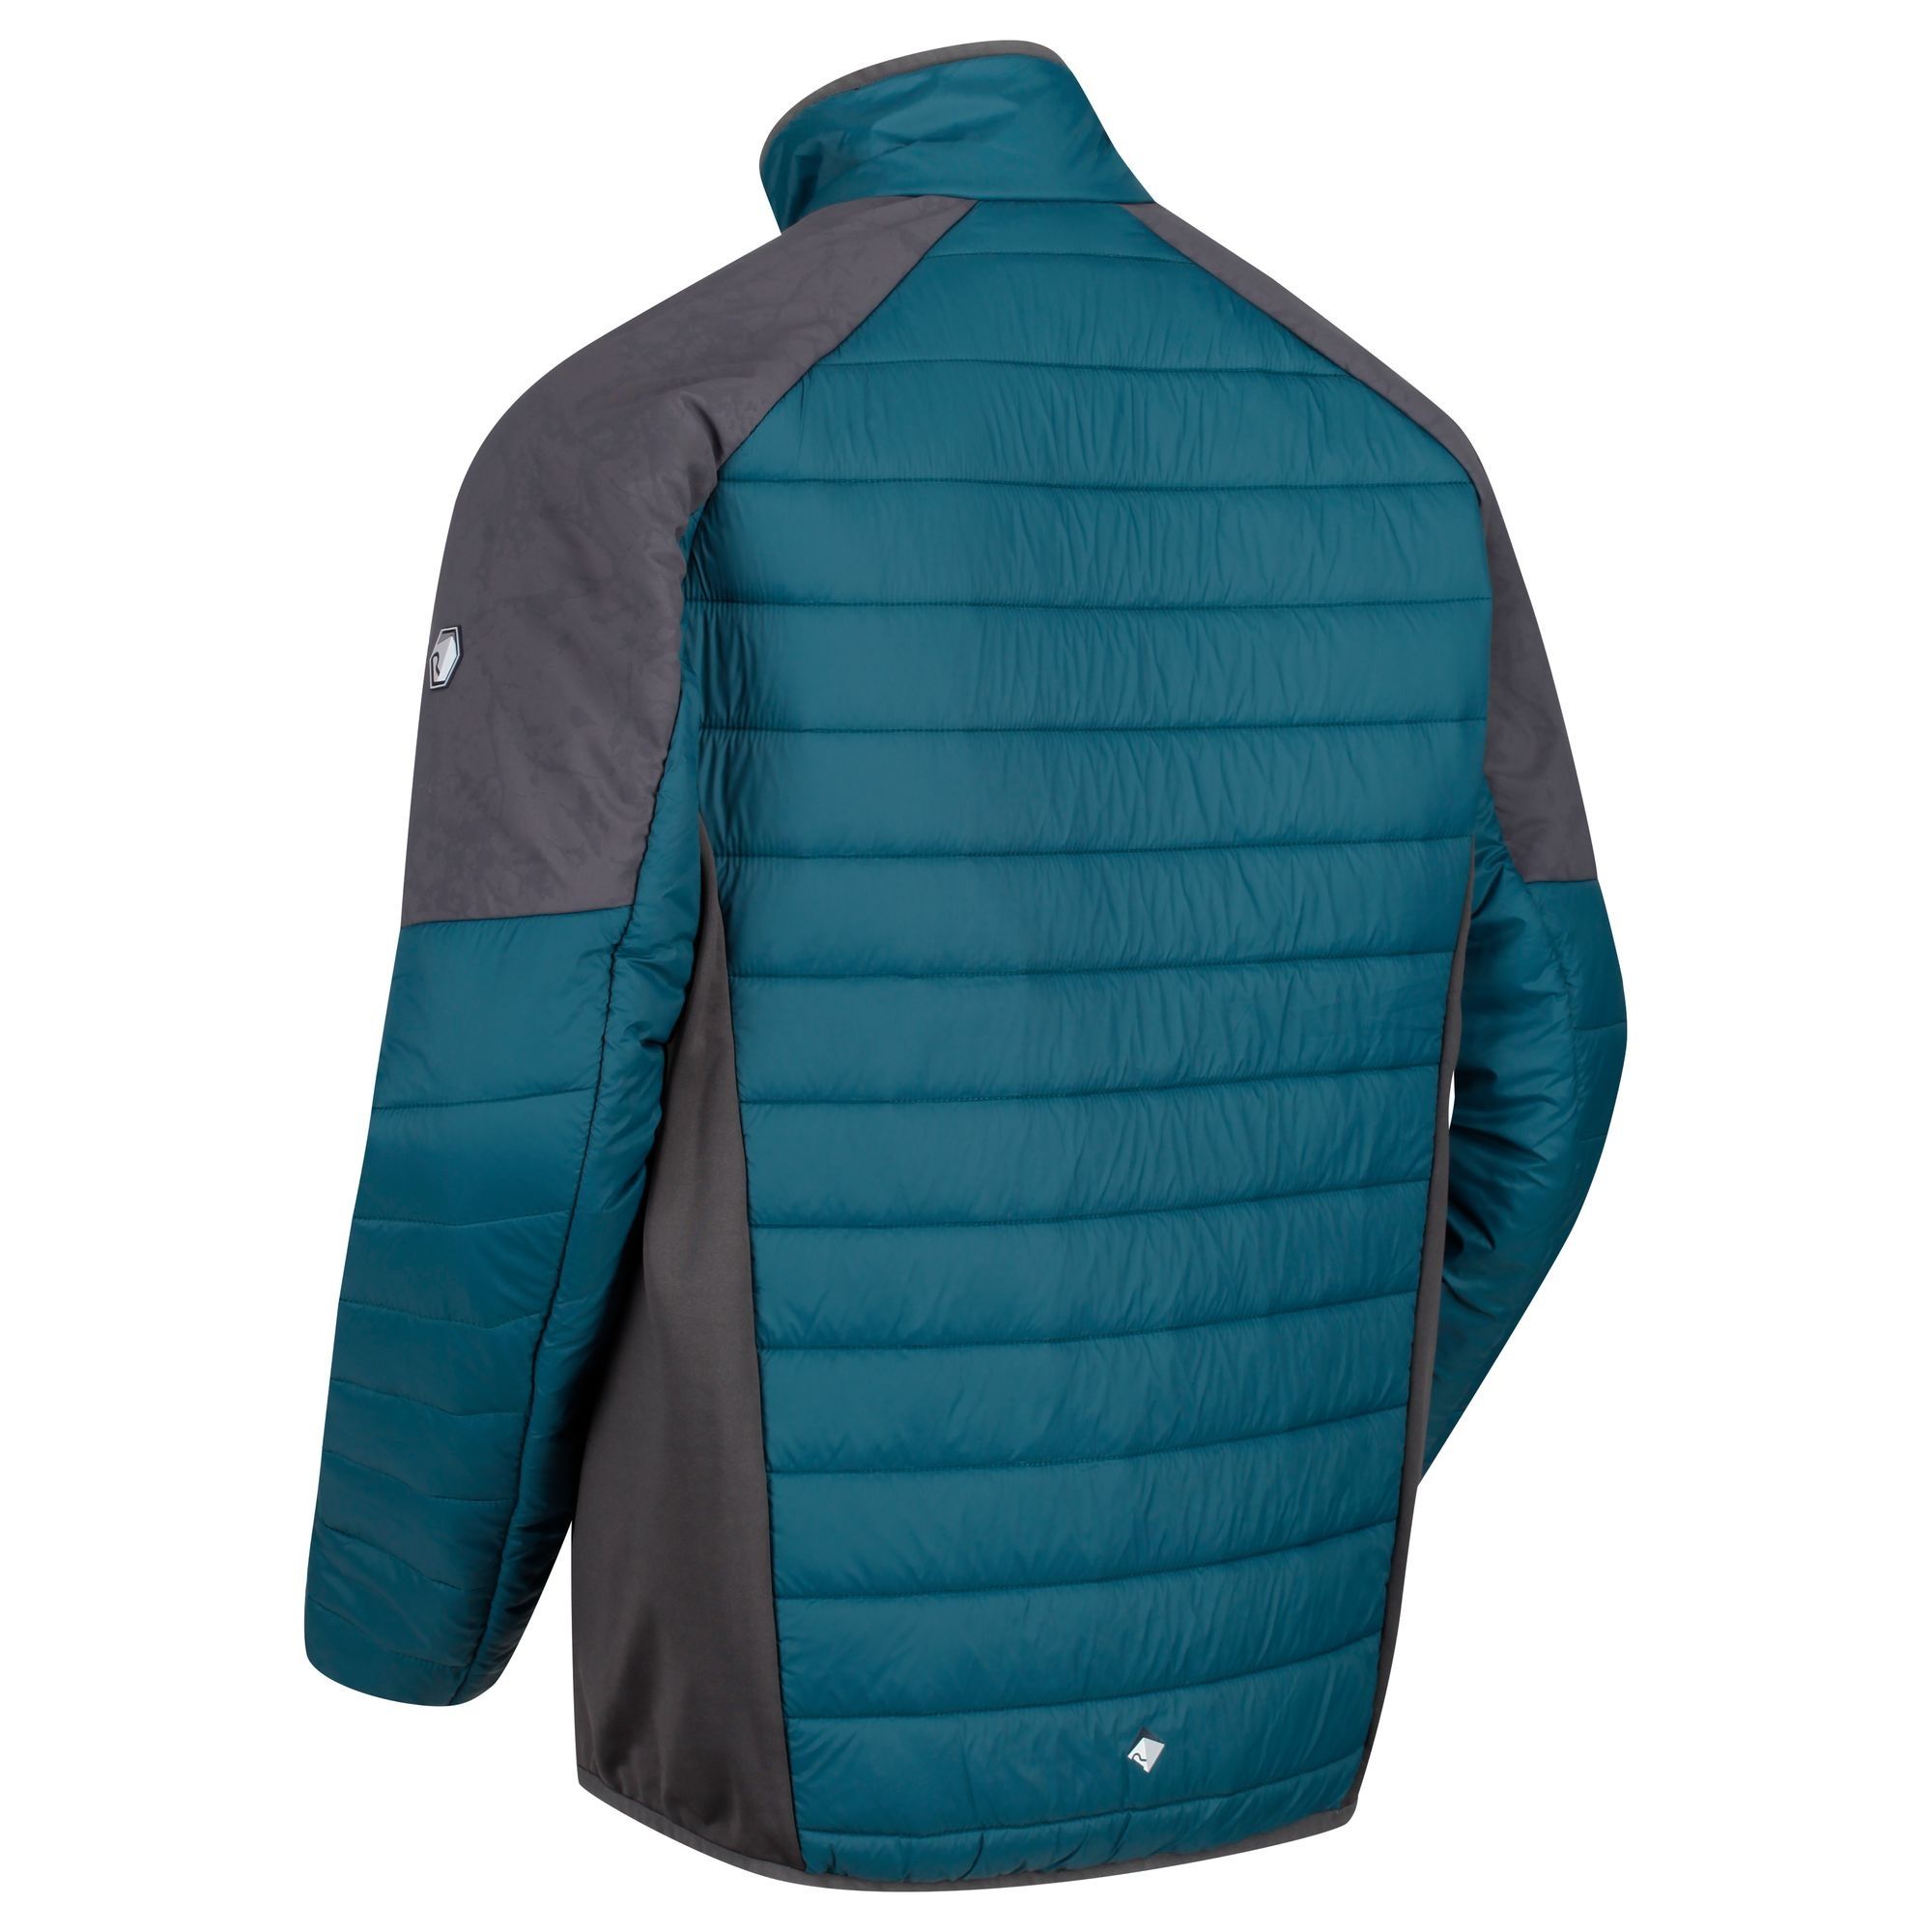 100% lightweight 20d polyamide fabric. Highly reflective printed panels in strategic zones for enhanced visibility. Durable water repellent finish. Lightweight Alpaca wool blend insulation to keep you warm even when wet. 2 zipped lower pockets. Stretch binding to collar and hem.